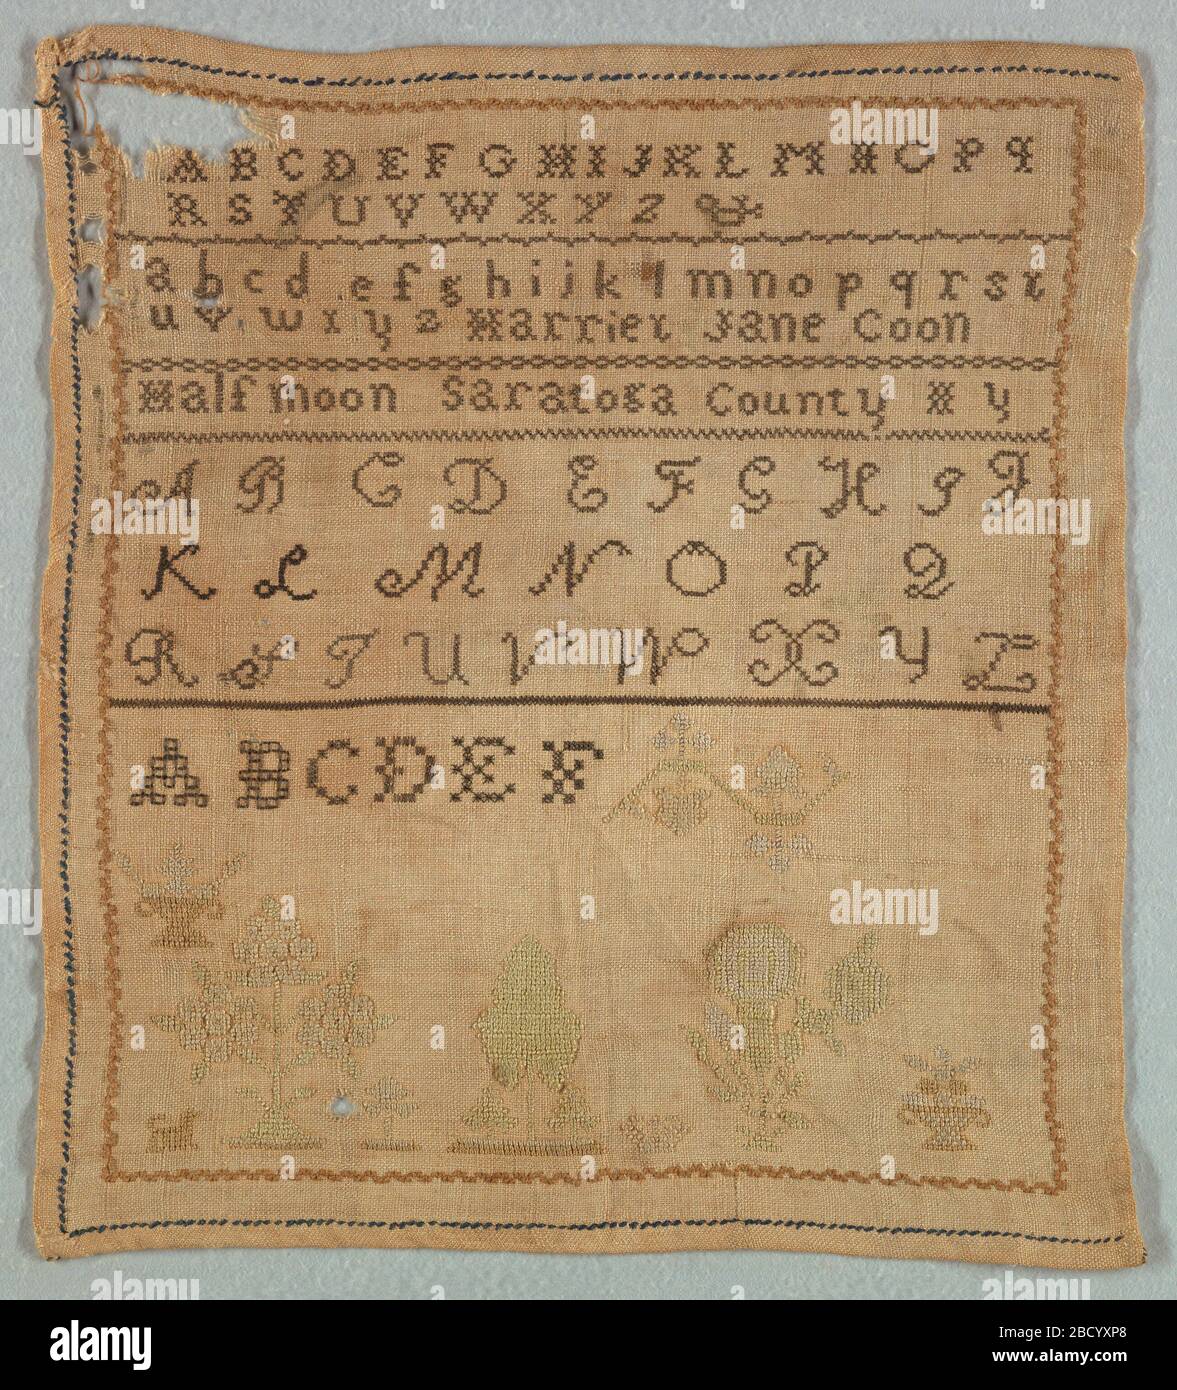 Sampler. Research in ProgressBands of alphabets, the inscription Half Moon Saratoga County NY, and scattered motifs. Sampler Stock Photo